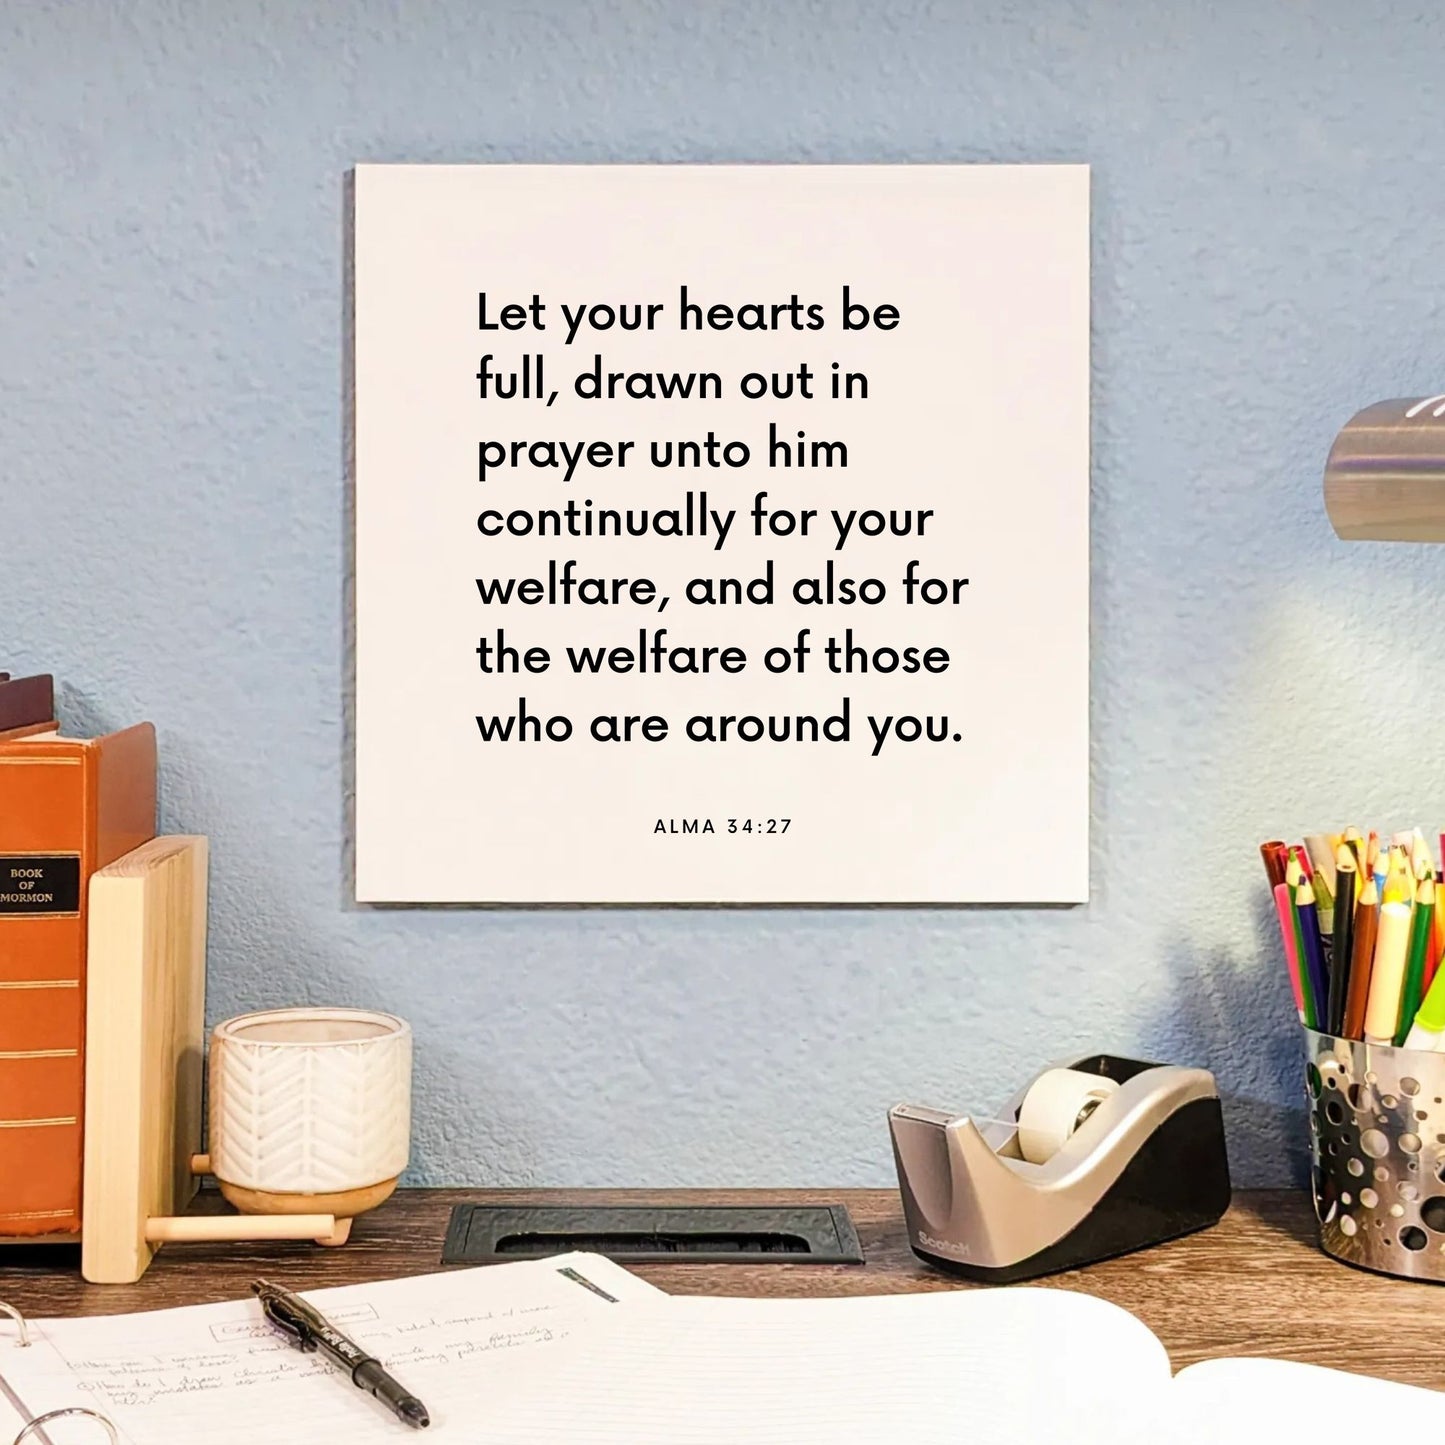 Desk mouting of the scripture tile for Alma 34:27 - "Let your hearts be full, drawn out in prayer"